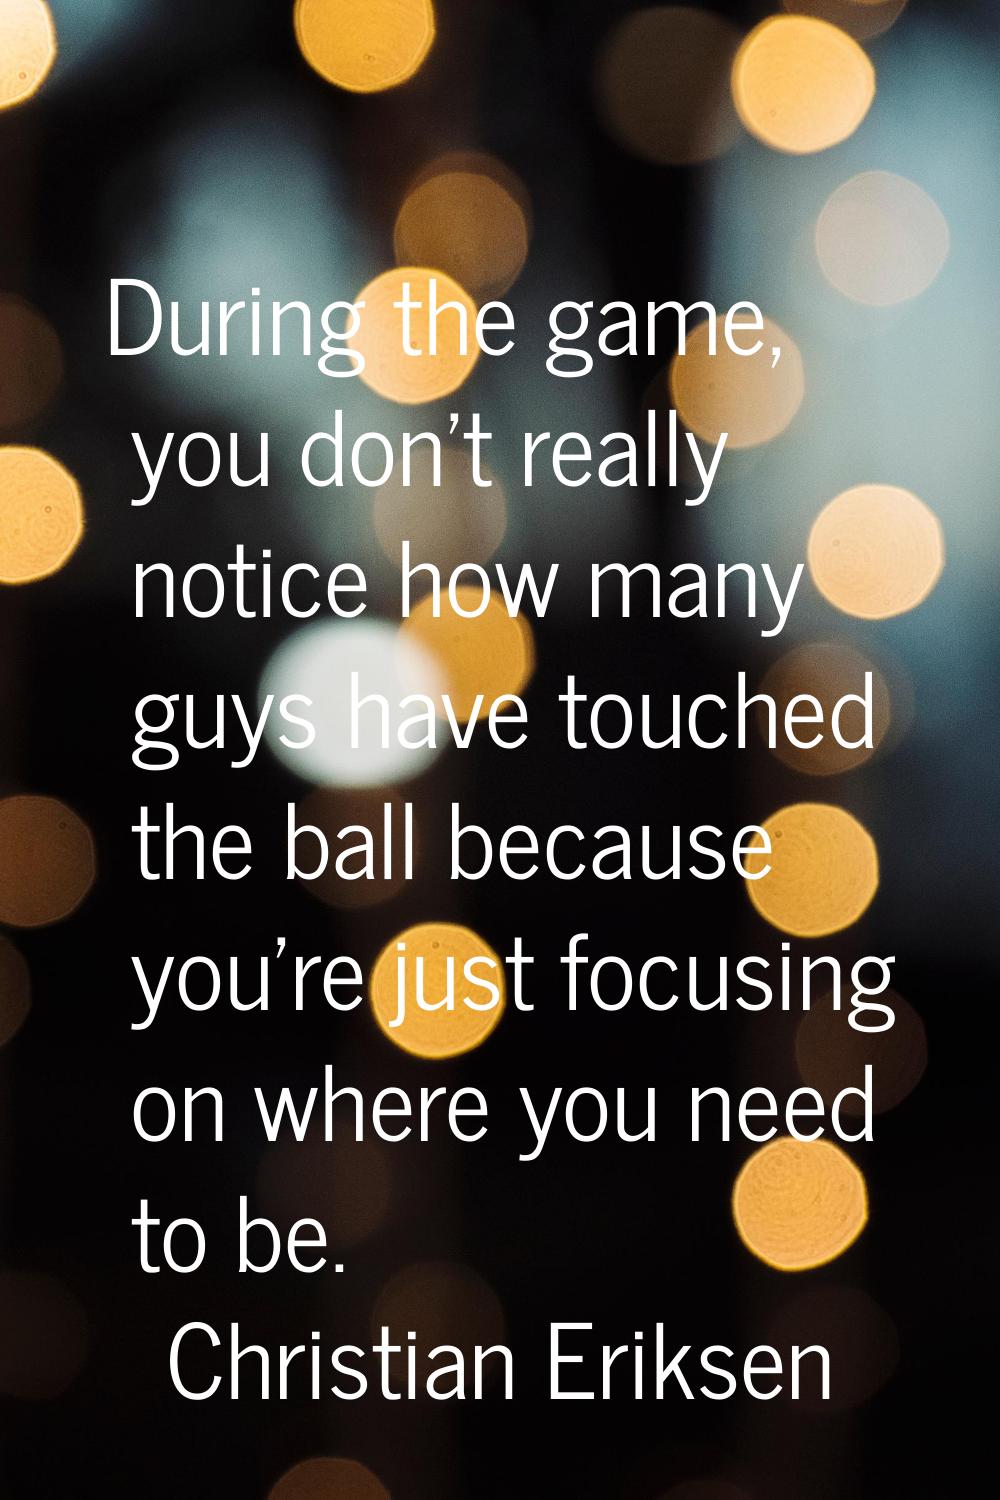 During the game, you don't really notice how many guys have touched the ball because you're just fo